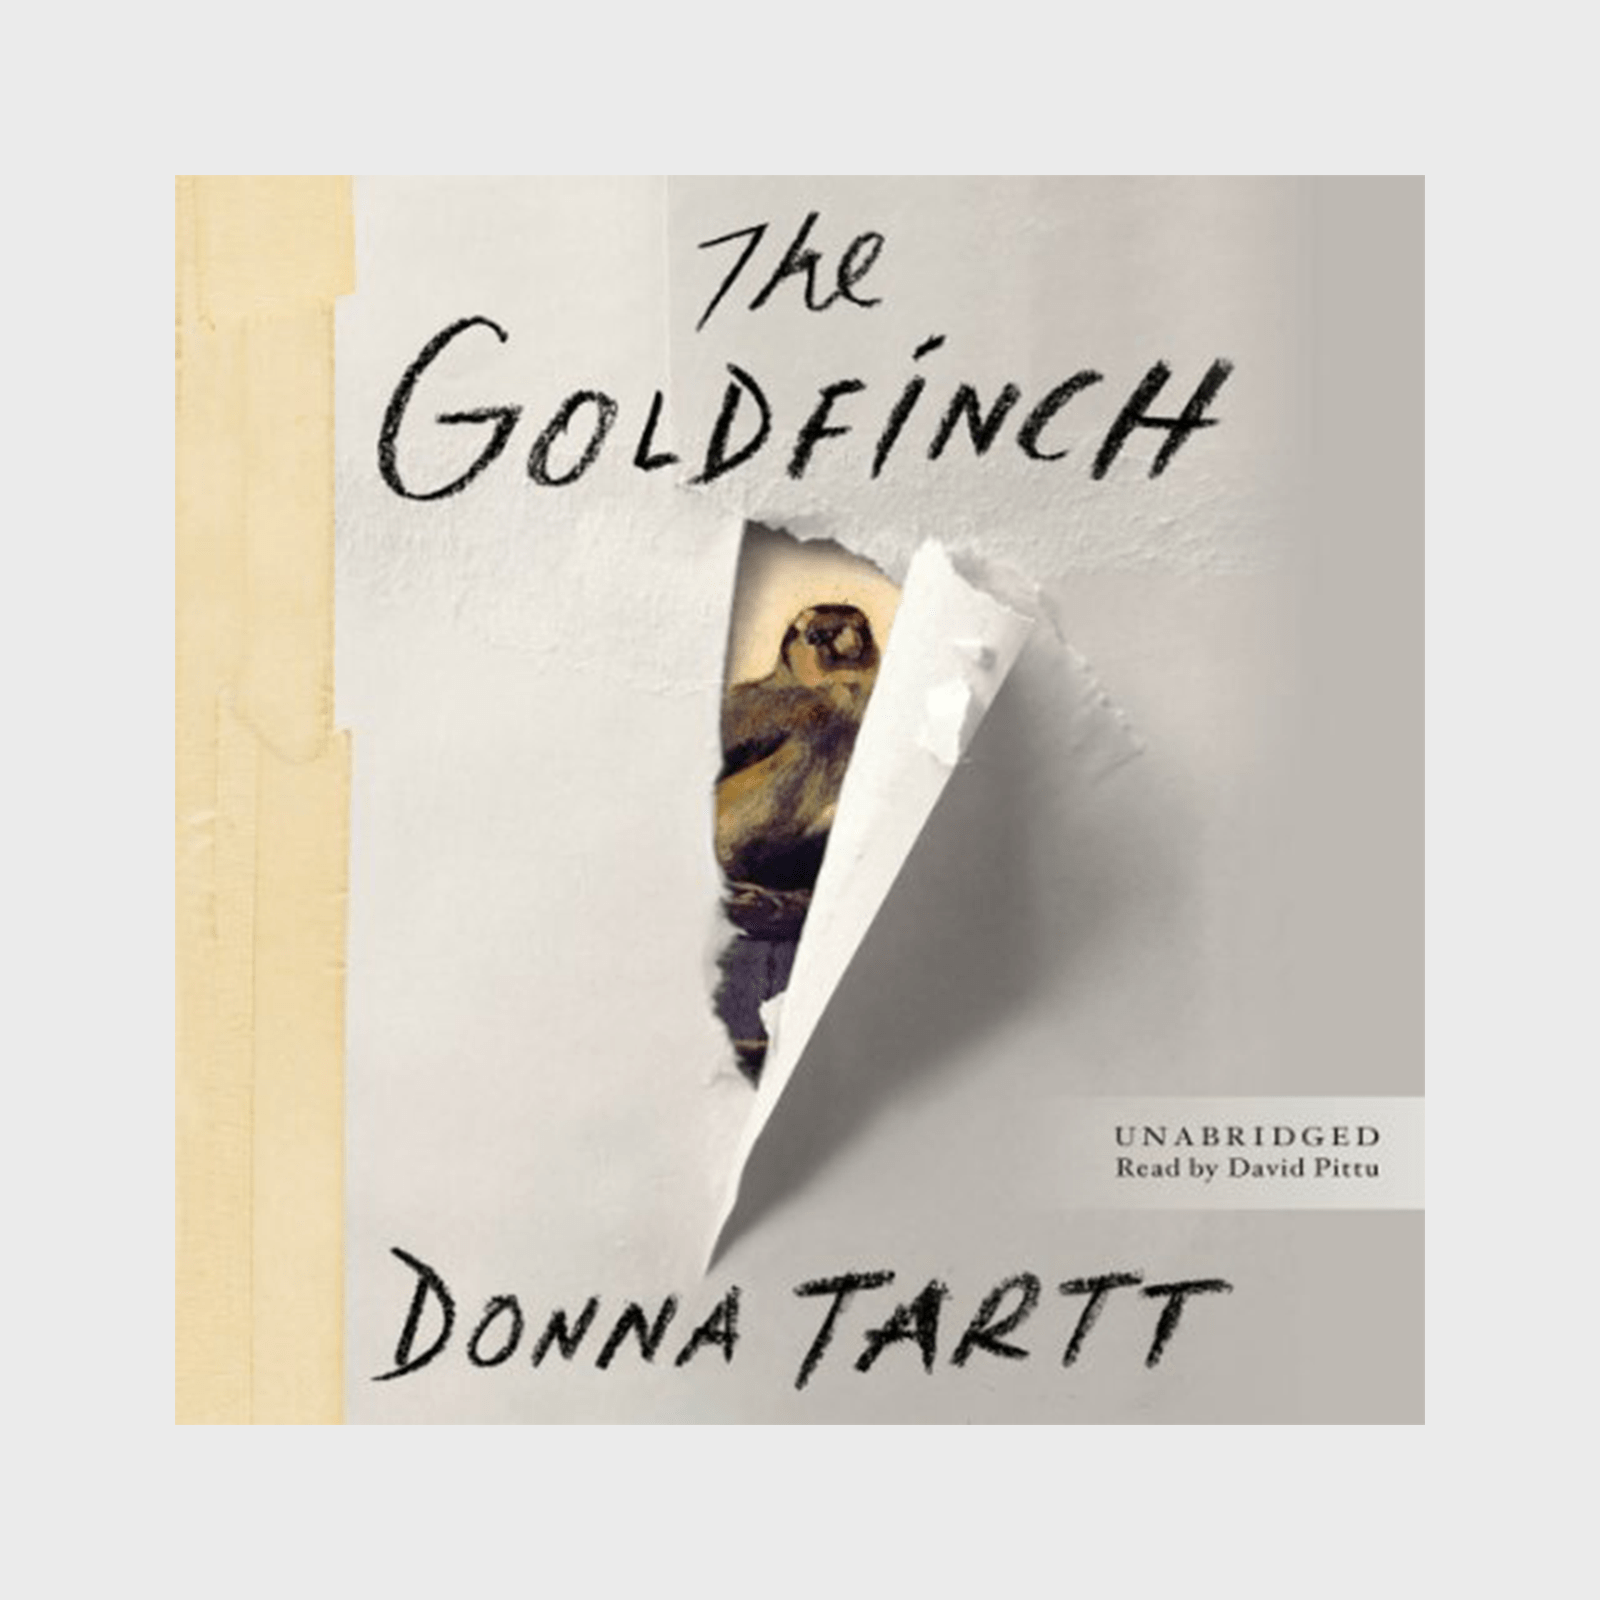 <h3><strong><em>The Goldfinch </em>by Donna Tartt</strong></h3> <p>This coming-of-age novel won the Pulitzer Prize for fiction in 2014—and if you haven't had time to read it, try listening to it, because it's also one of the best audiobooks in literary fiction. A haunting story that begins with a bombing at the Metropolitan Museum of Art, and a boy who survives along with the title painting, the acclaimed audiobook lets you take Donna Tartt's crystalline prose and intricate storytelling on the go. Winner of Audie Awards for Solo Narration-Male and Literary Fiction, <a href="https://www.amazon.com/The-Goldfinch-Donna-Tartt-audiobook/dp/B00ELMSEJC/" rel="noopener noreferrer"><em>The Goldfinch</em></a> is narrated by actor David Pittu.</p> <p class="listicle-page__cta-button-shop"><a class="shop-btn" href="https://www.amazon.com/The-Goldfinch-Donna-Tartt-audiobook/dp/B00ELMSEJC/">Shop Now</a></p>